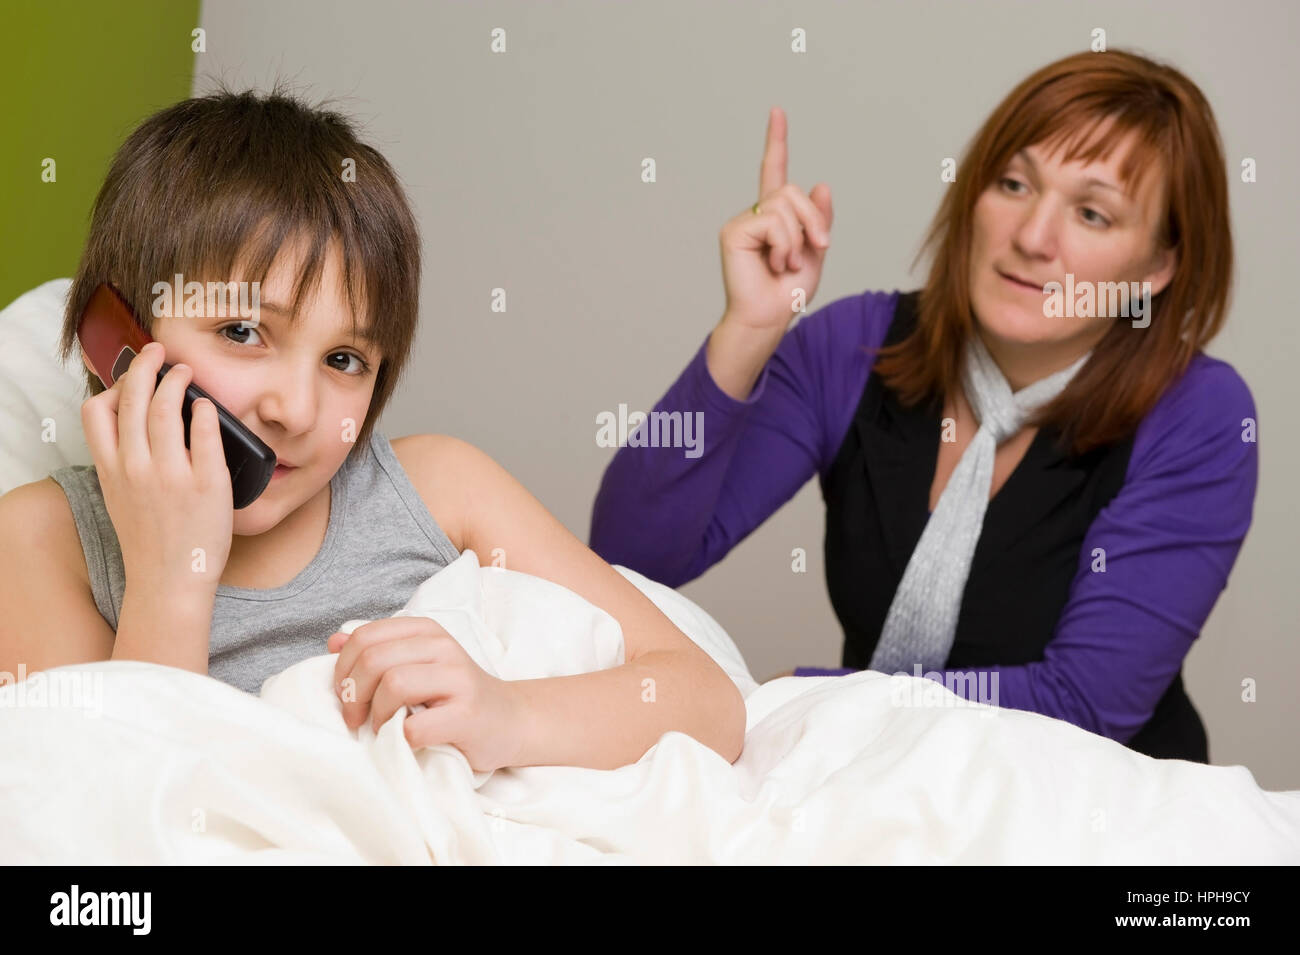 Sohn im Bett mit Handy, Mutter schimpft - son with mobile phone in bed, mother scolds, Model released Stock Photo